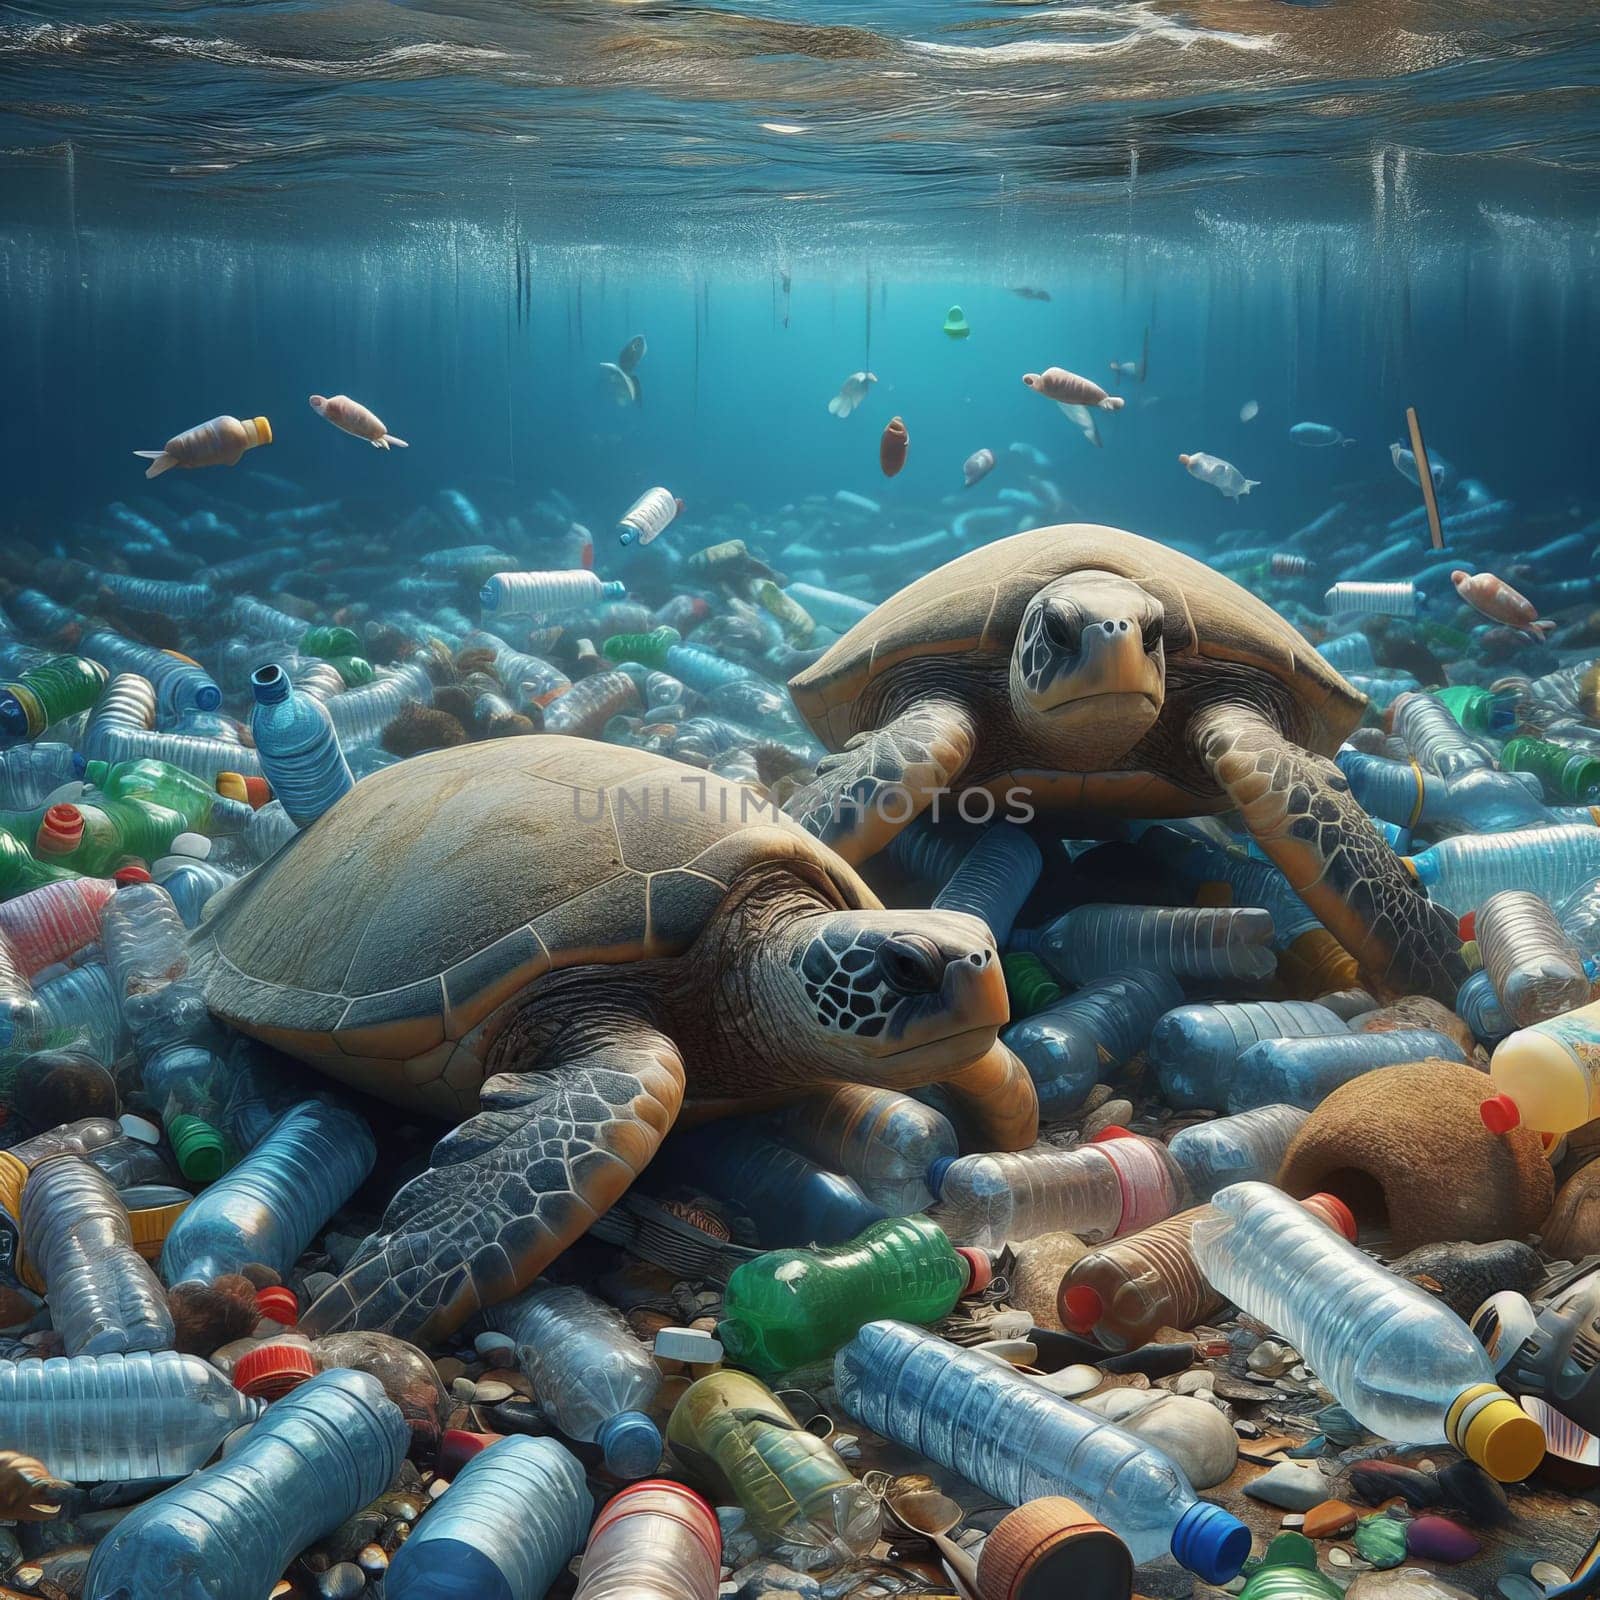 Underwater scene of turtles amidst plastic waste, highlighting the issue of environmental pollution. by sfinks